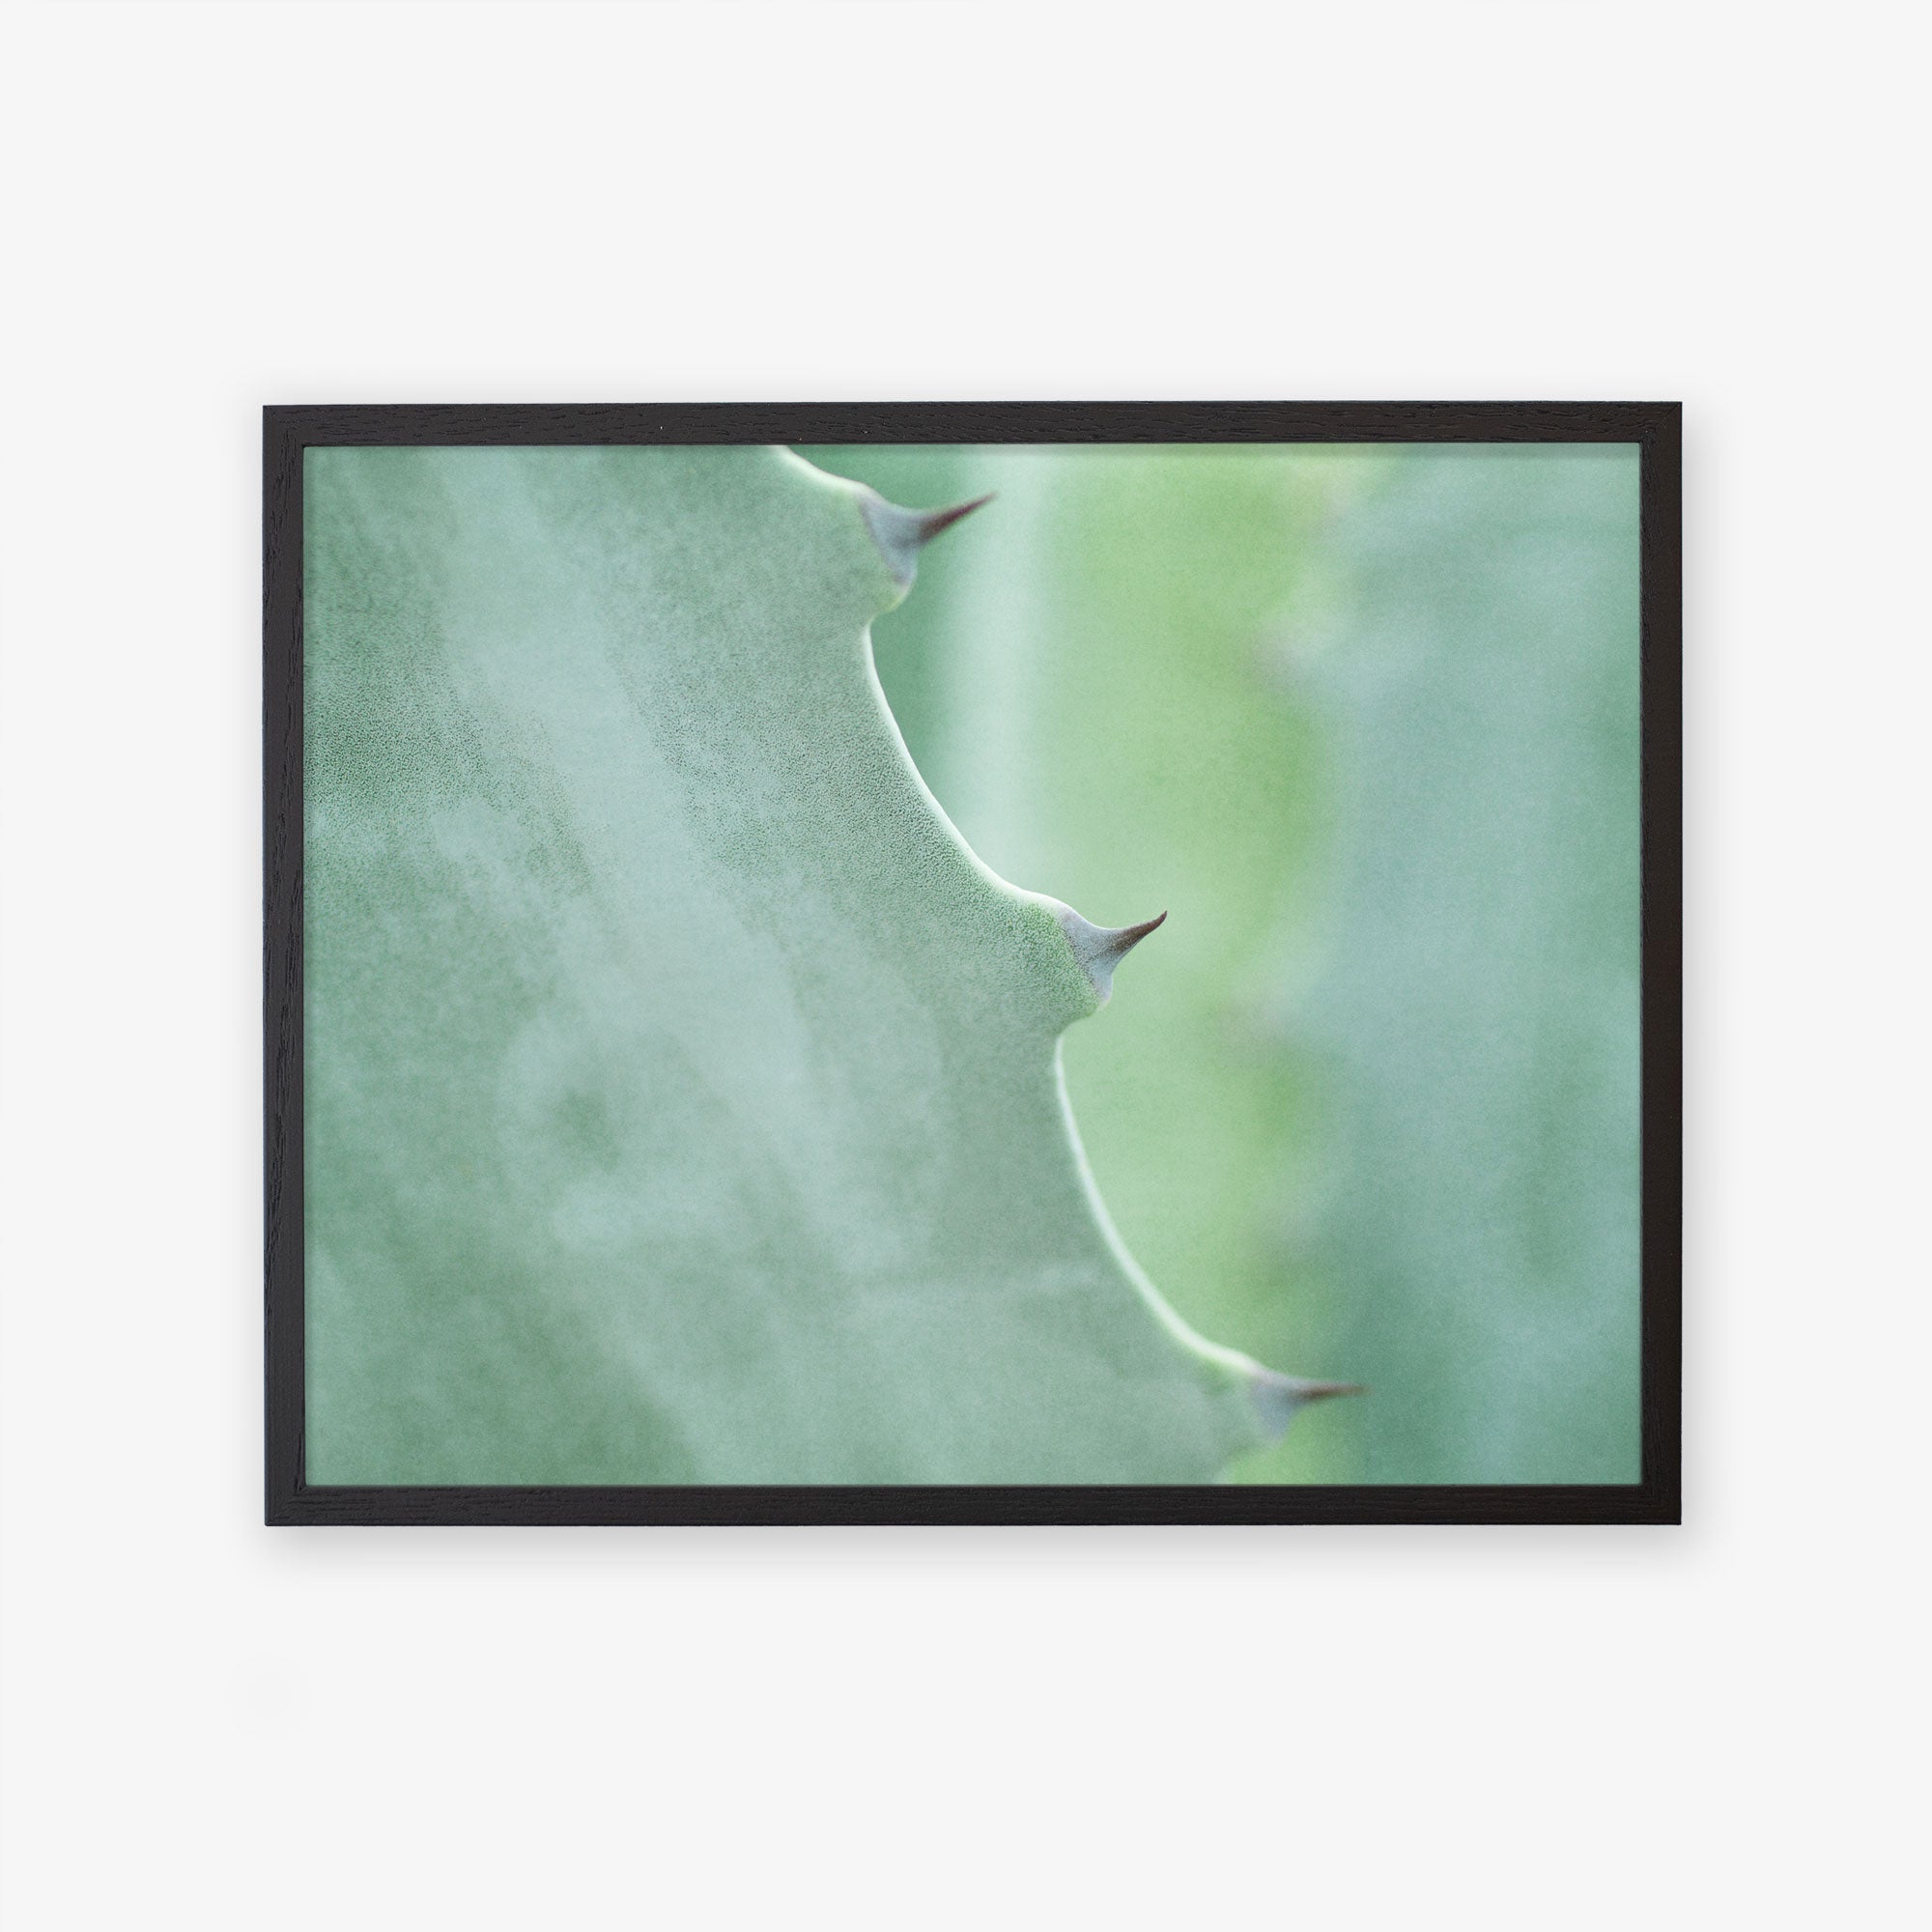 Close-up photo of an Offley Green Mint Green Botanical Print, &#39;Aloe Vera Spikes&#39; plant leaf with sharp thorns on its edges, framed and displayed on a wall. The background is softly blurred, emphasizing the leaf detail.